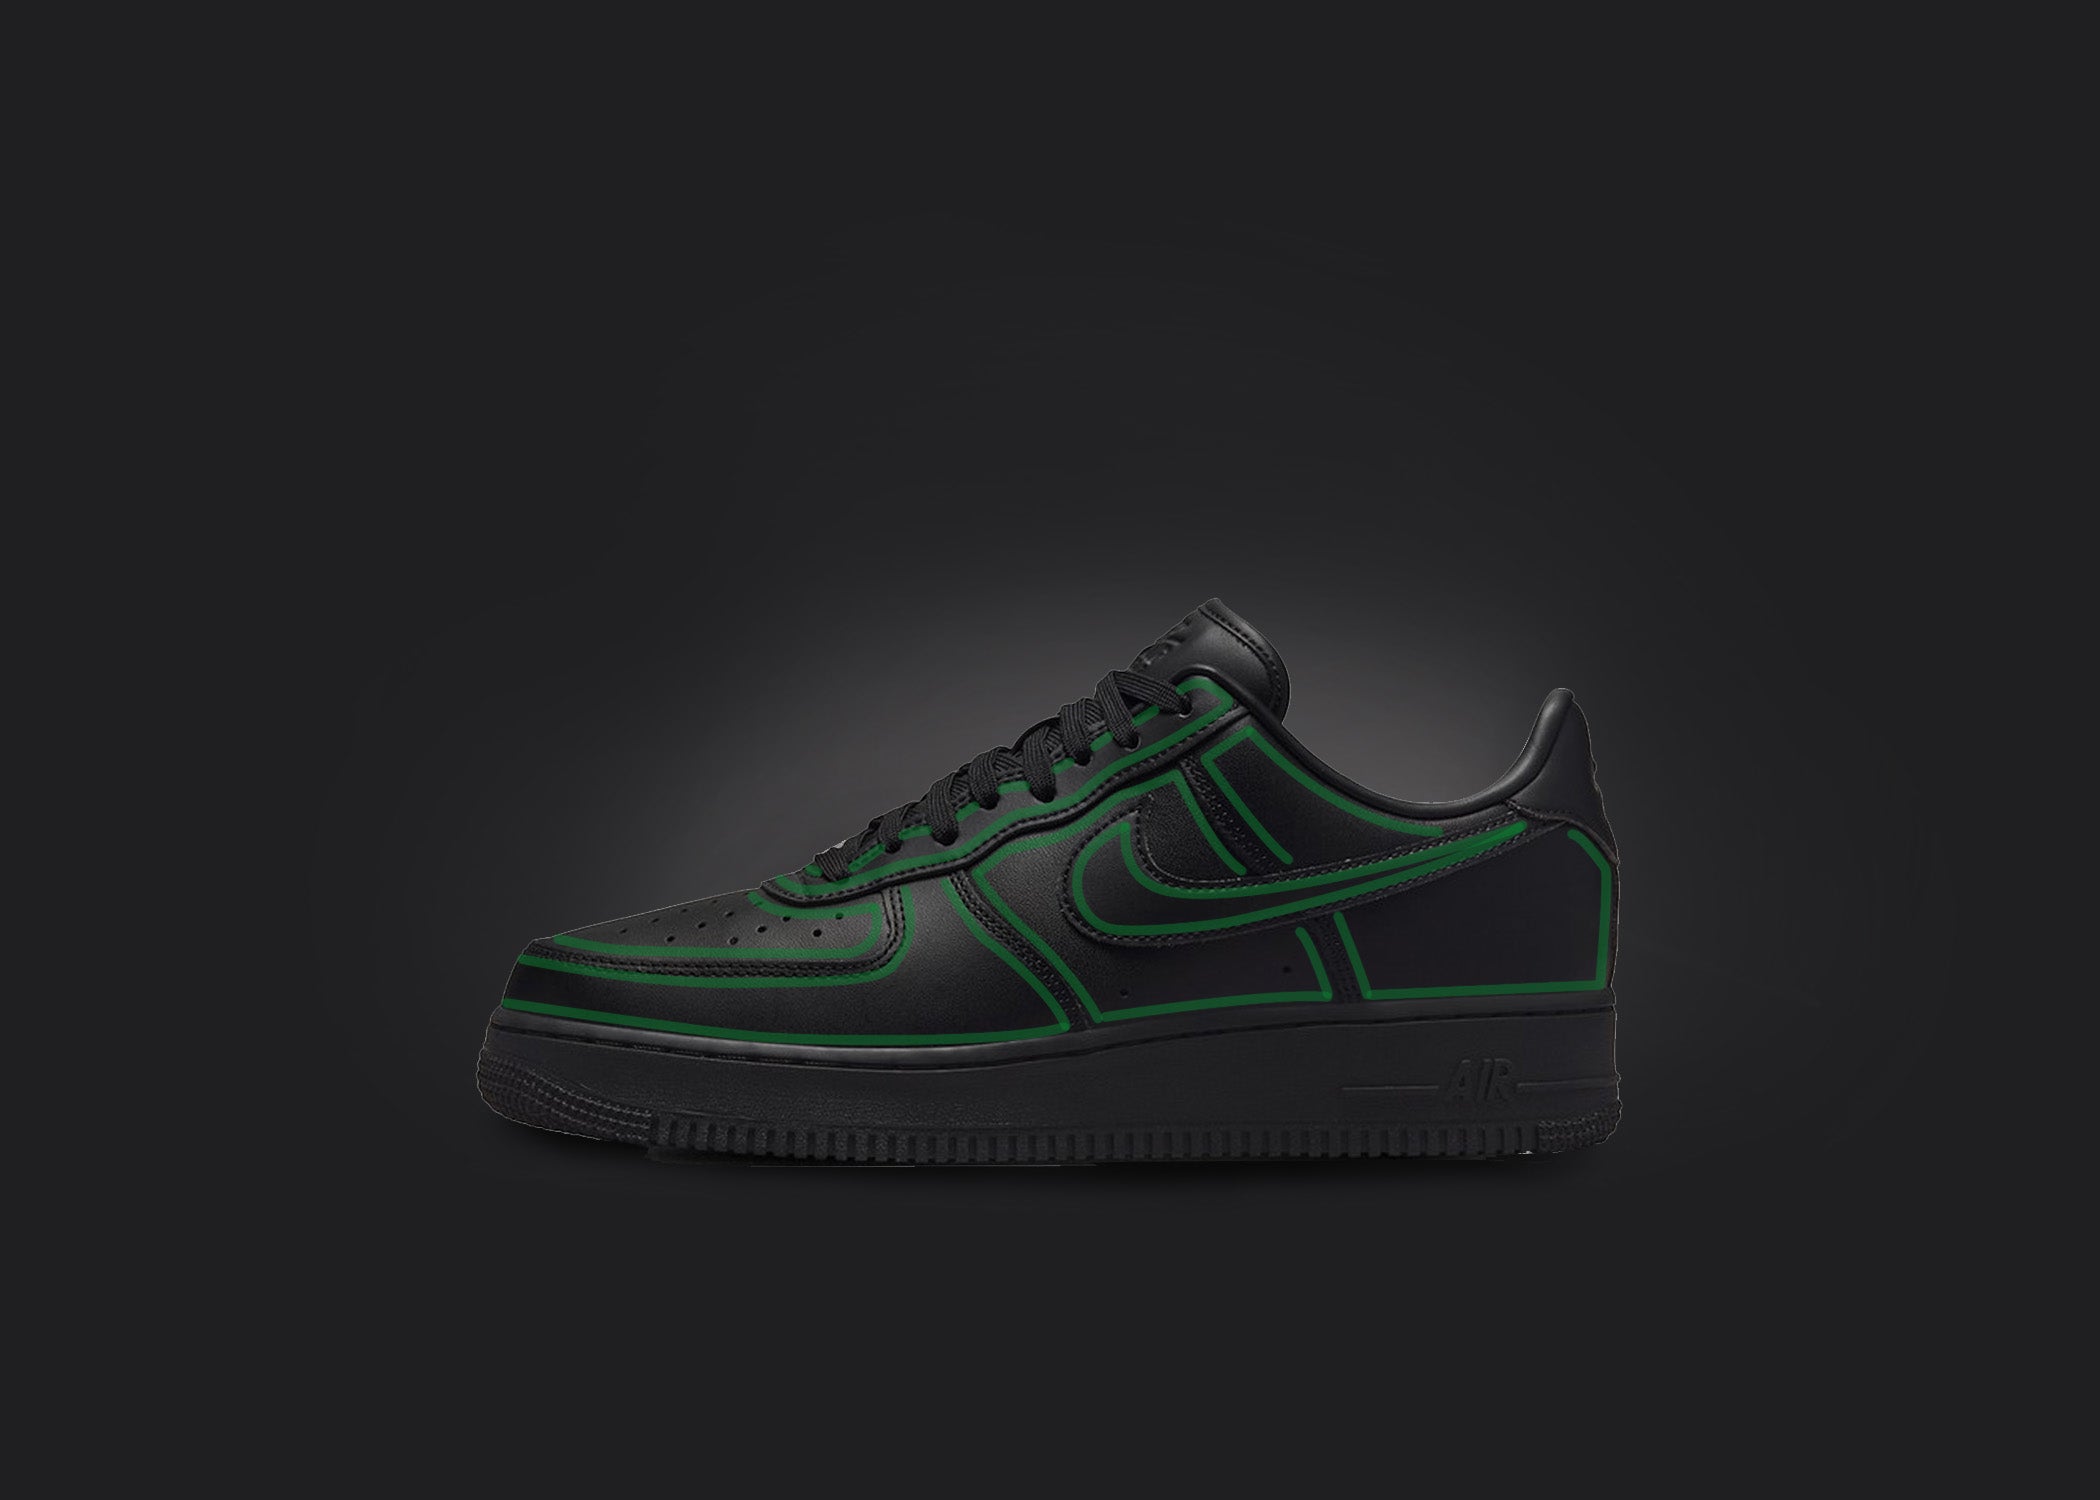 Nike Air Force 1 Custom Shoes Black Neon Splatter Green Blue Pink Red All Sizes